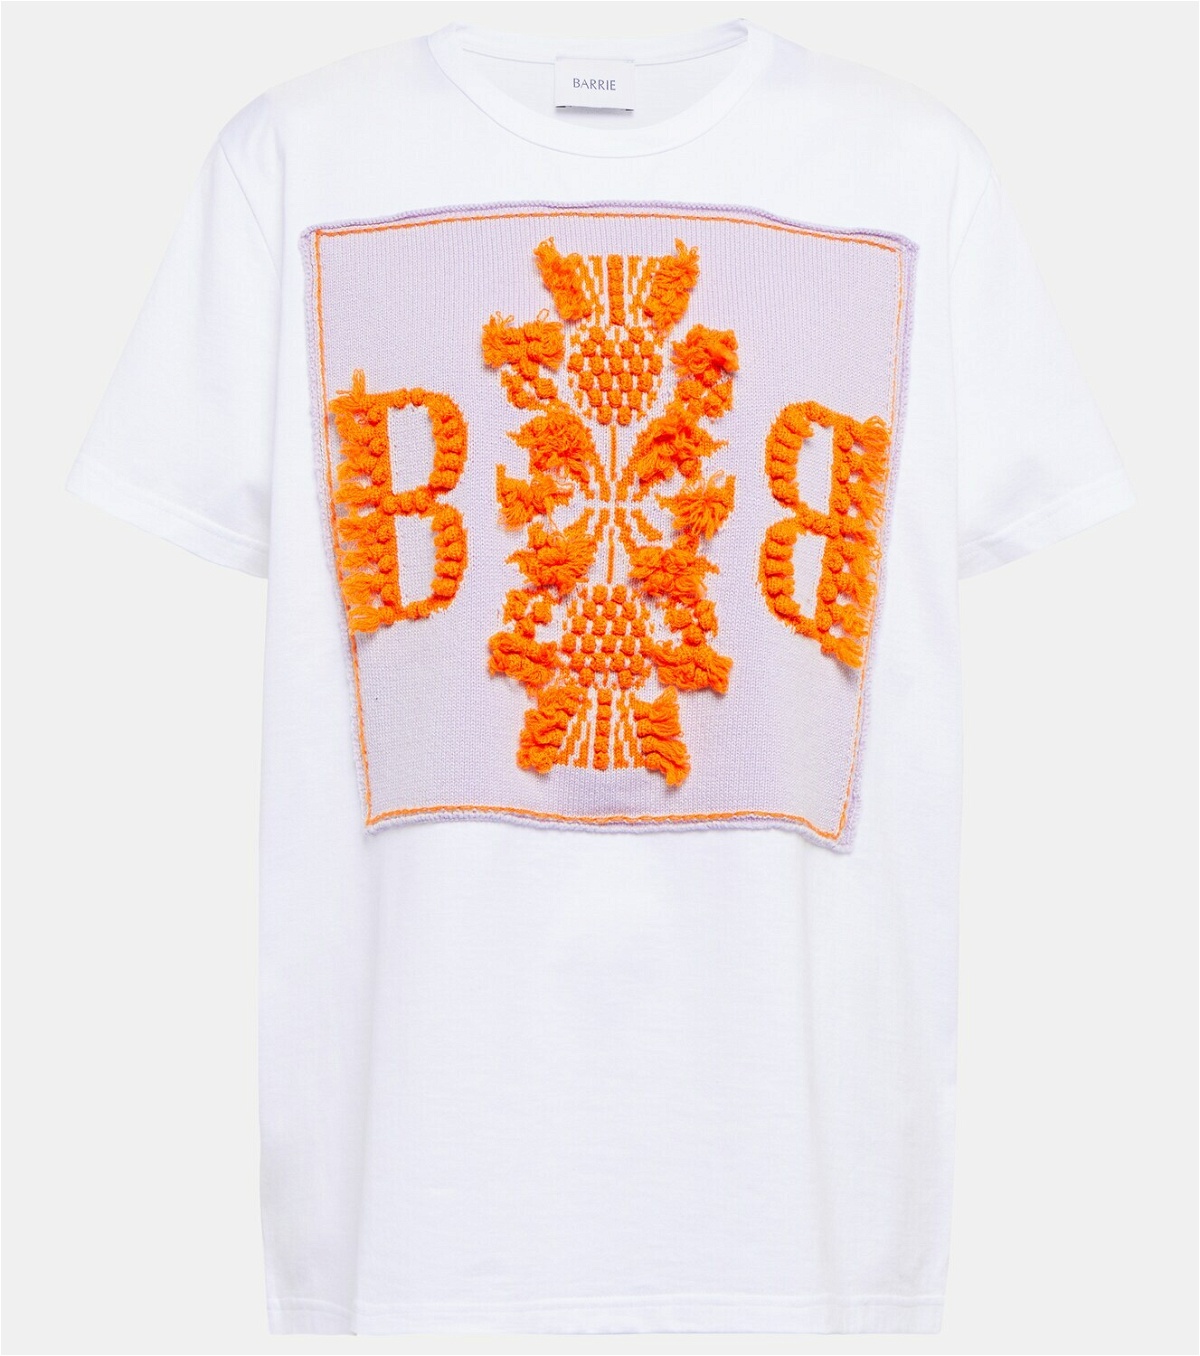 Barrie Cotton and cashmere logo T-shirt